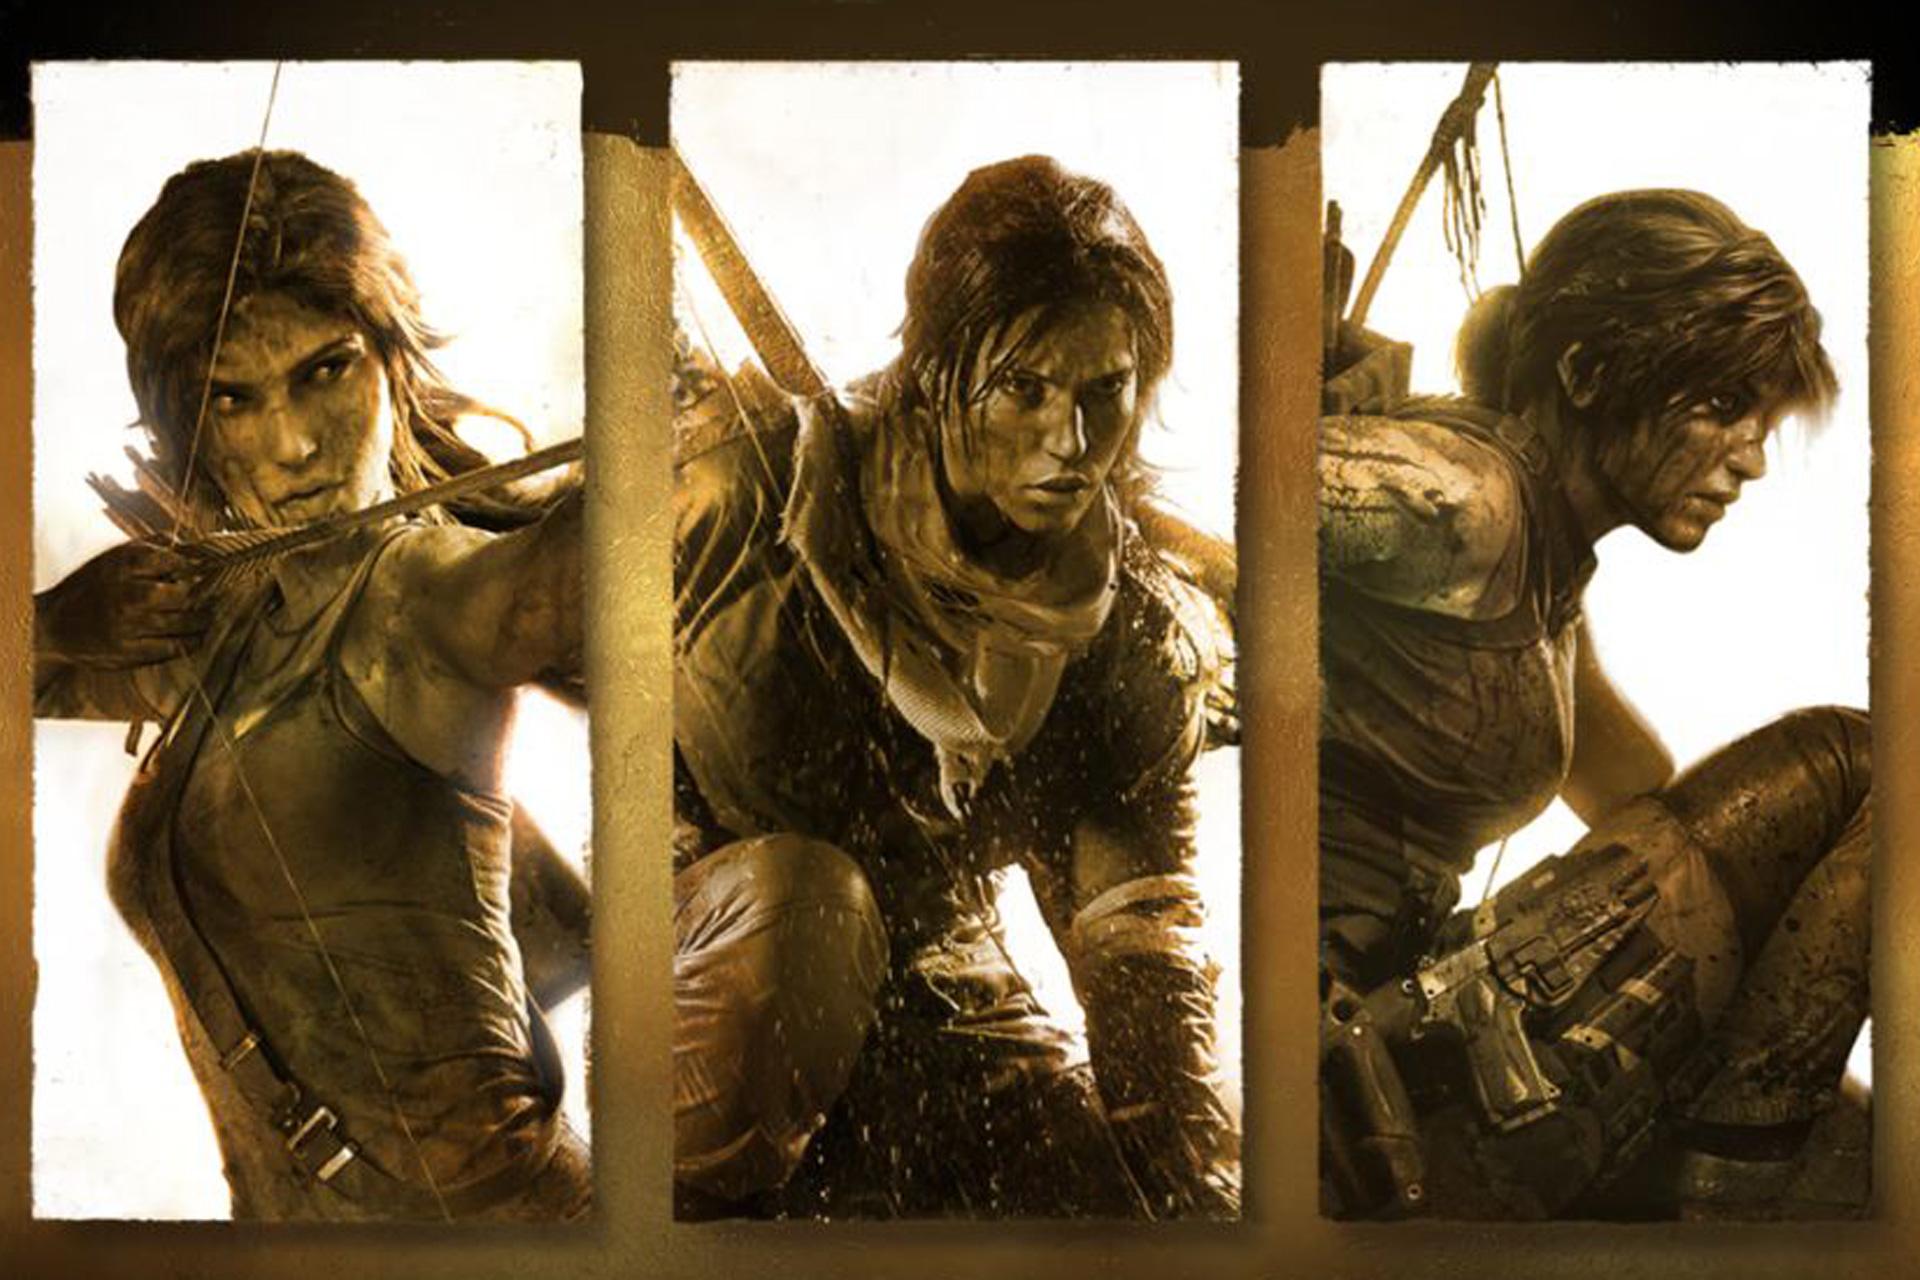 A collage of three box art covers featuring Lara Croft in a golden hue.